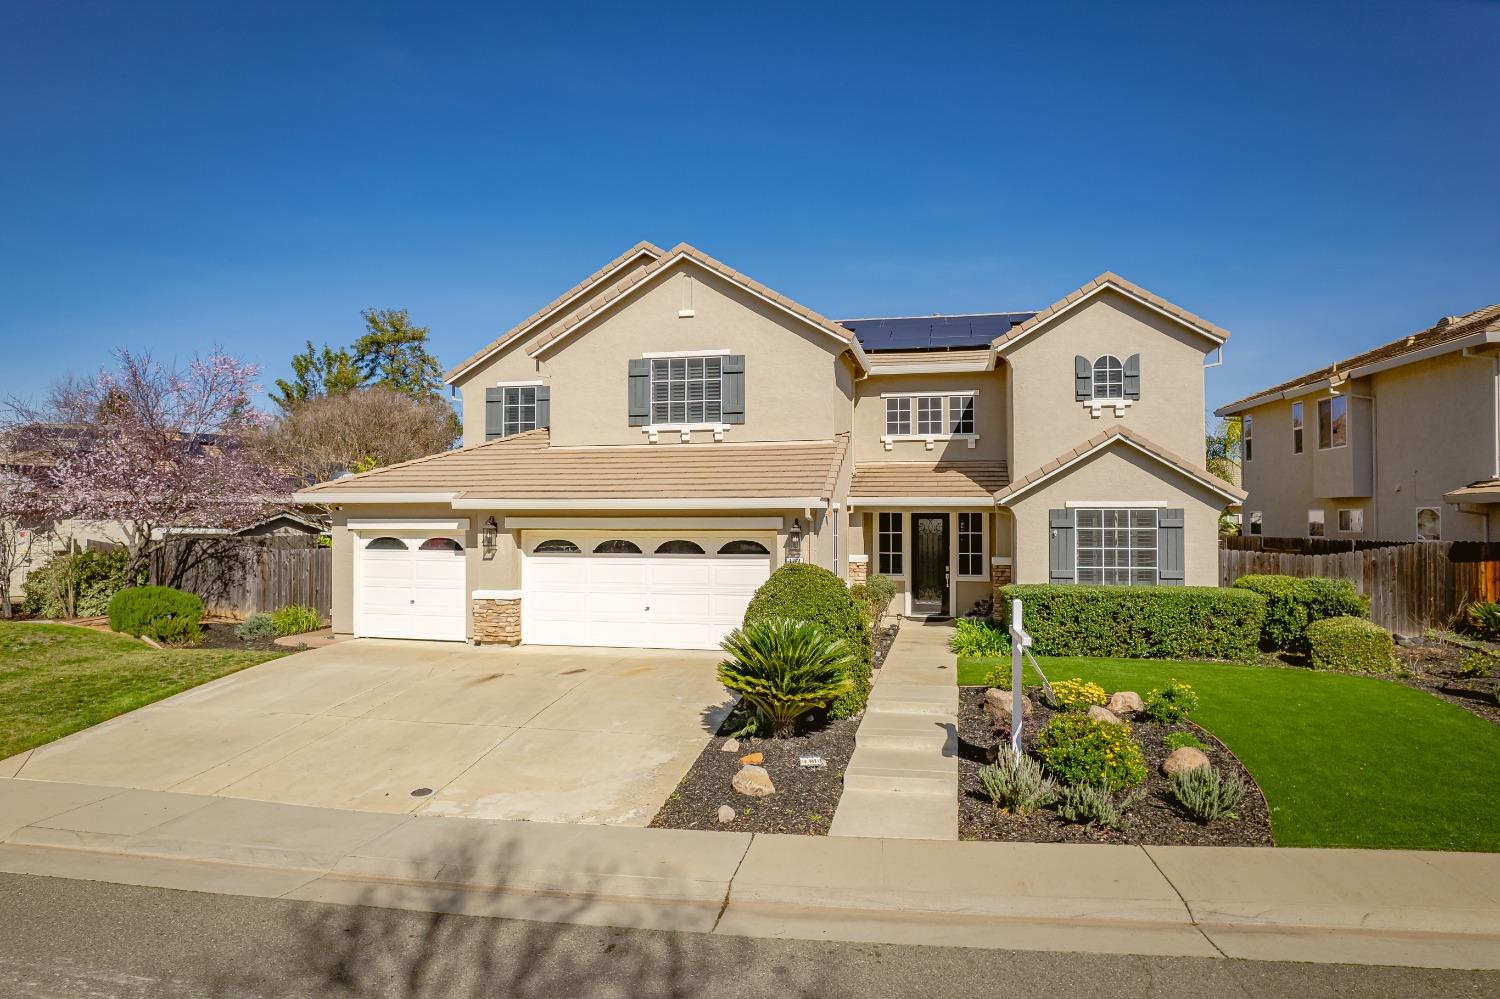 Photo of 1764 Allenwood Cir in Lincoln, CA